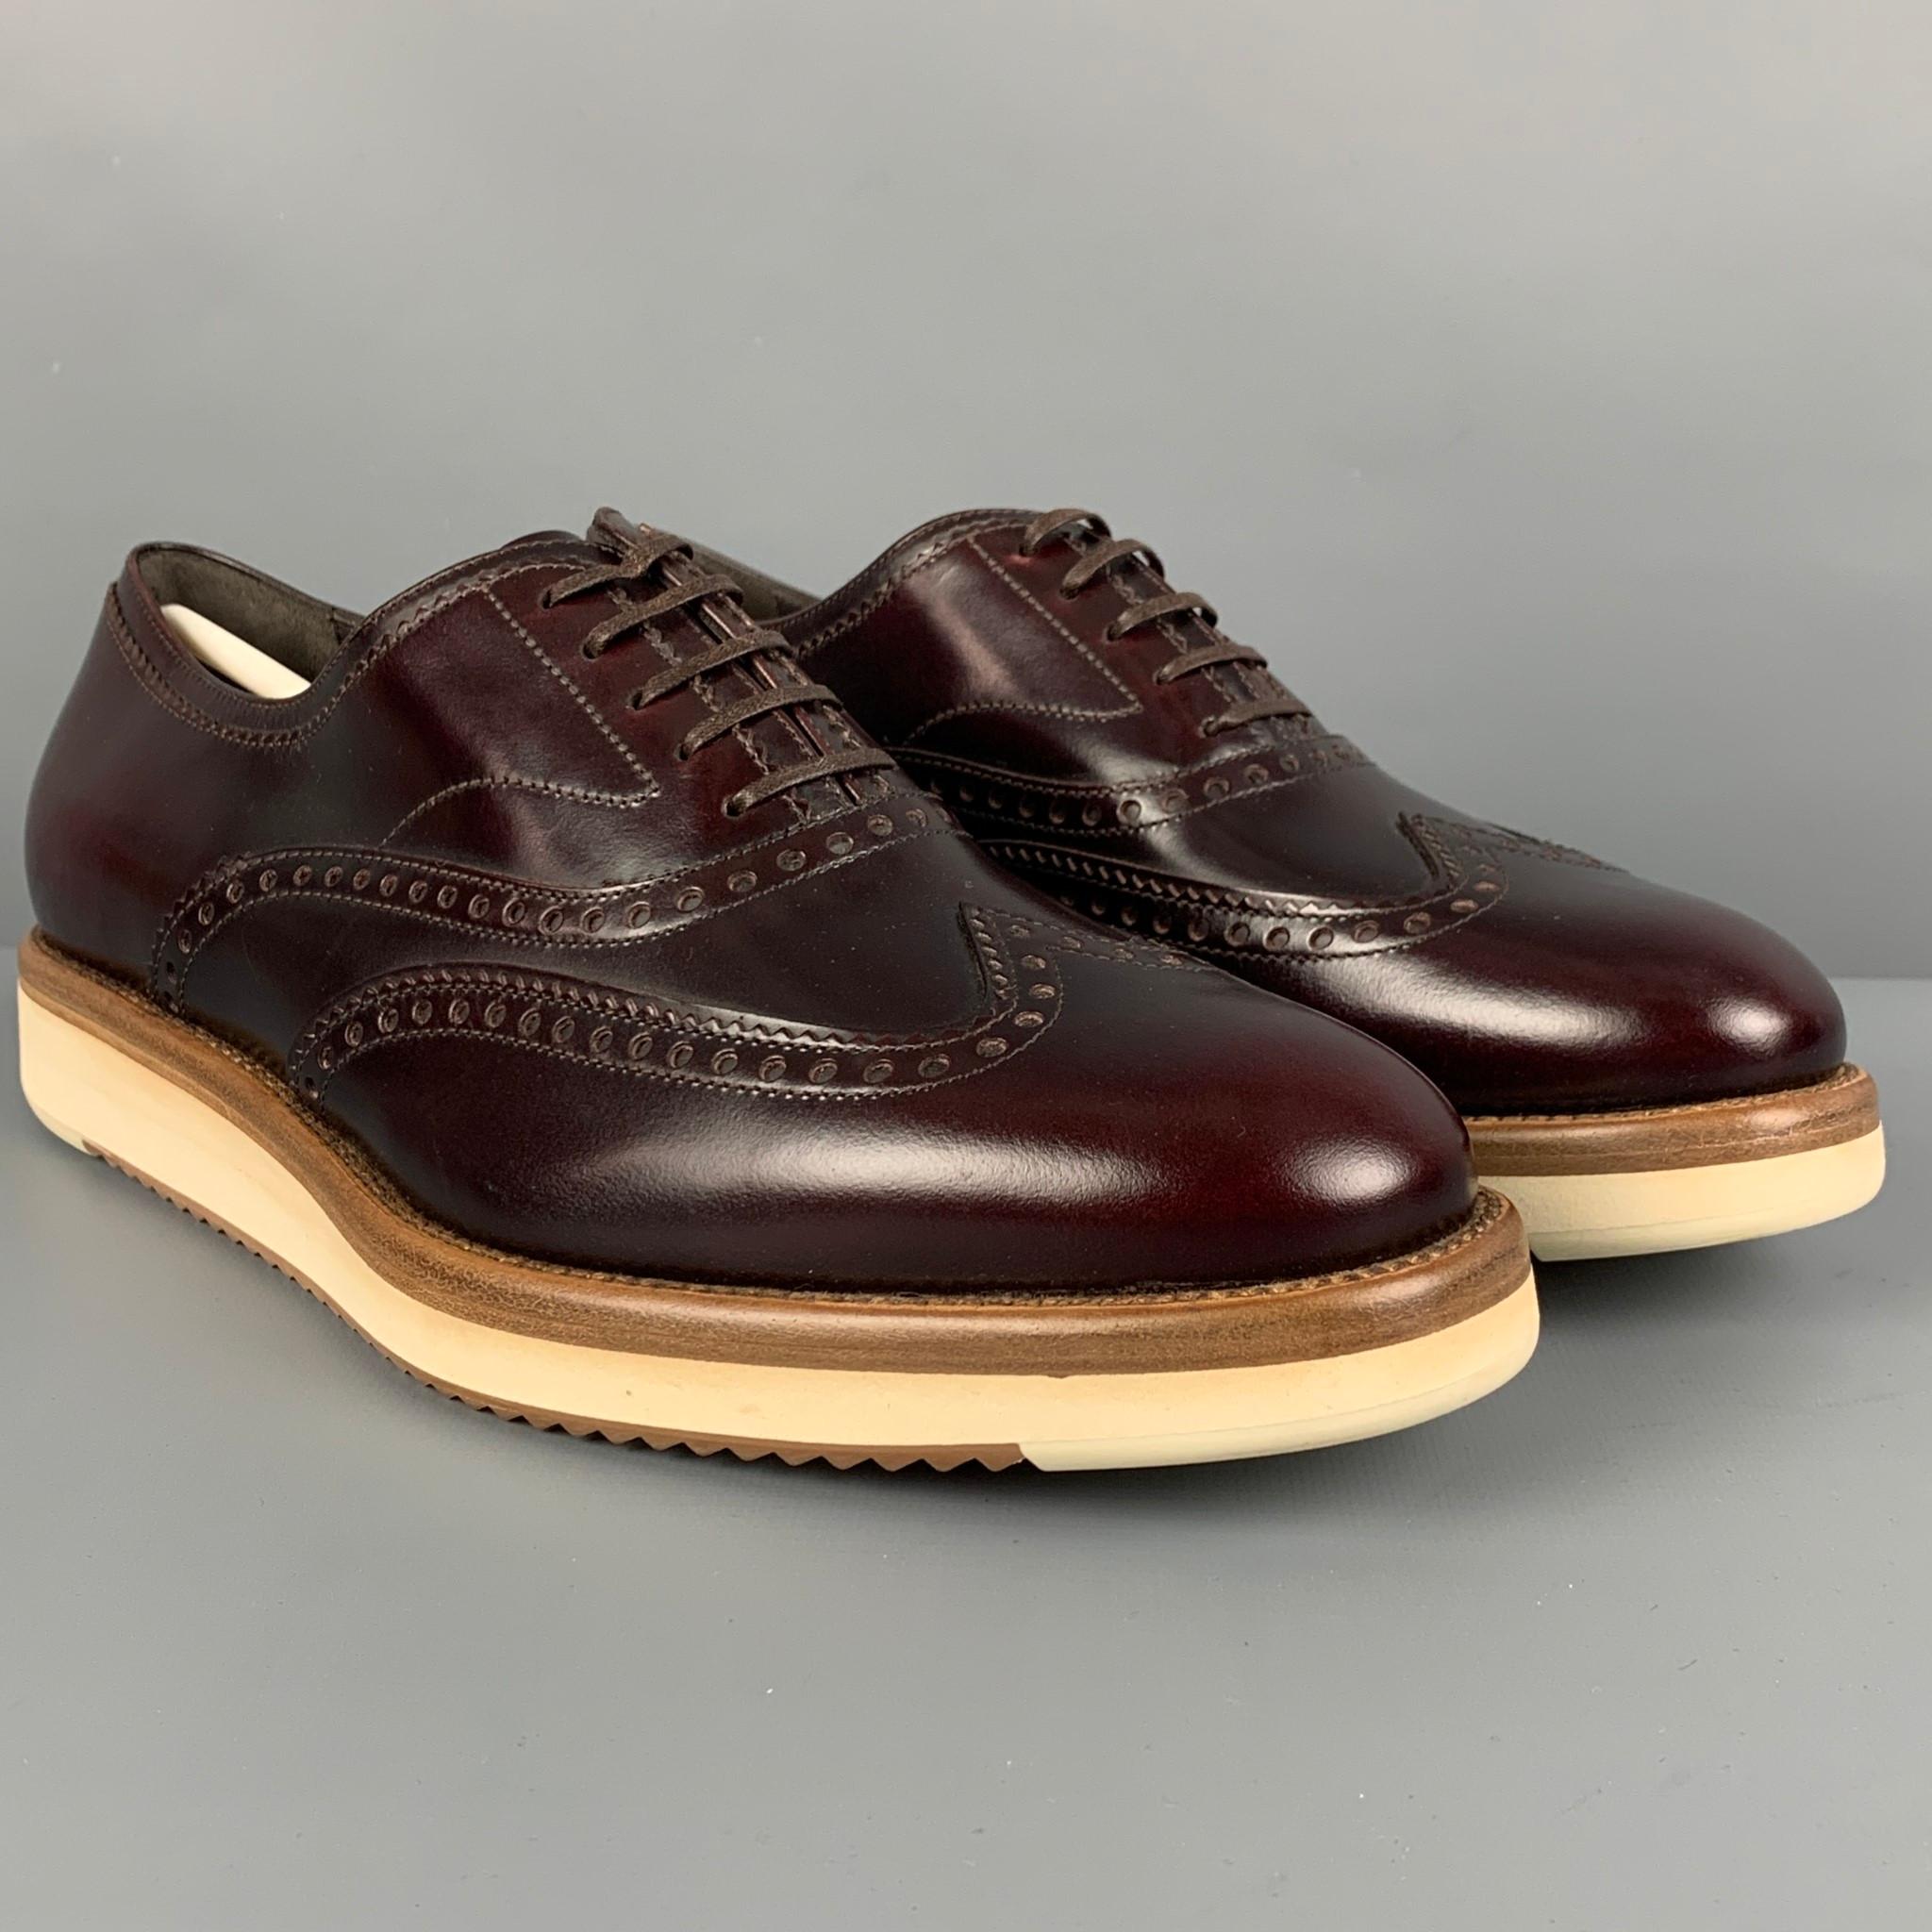 SALVATORE FERRAGAMO shoes comes in a burgundy perforated leather featuring a wing tip style and a lace up closure. Made in Italy. 

New Without Tags.
Marked: LC 34967 7 3E

Outsole: 11.5 in. x 4 in. 